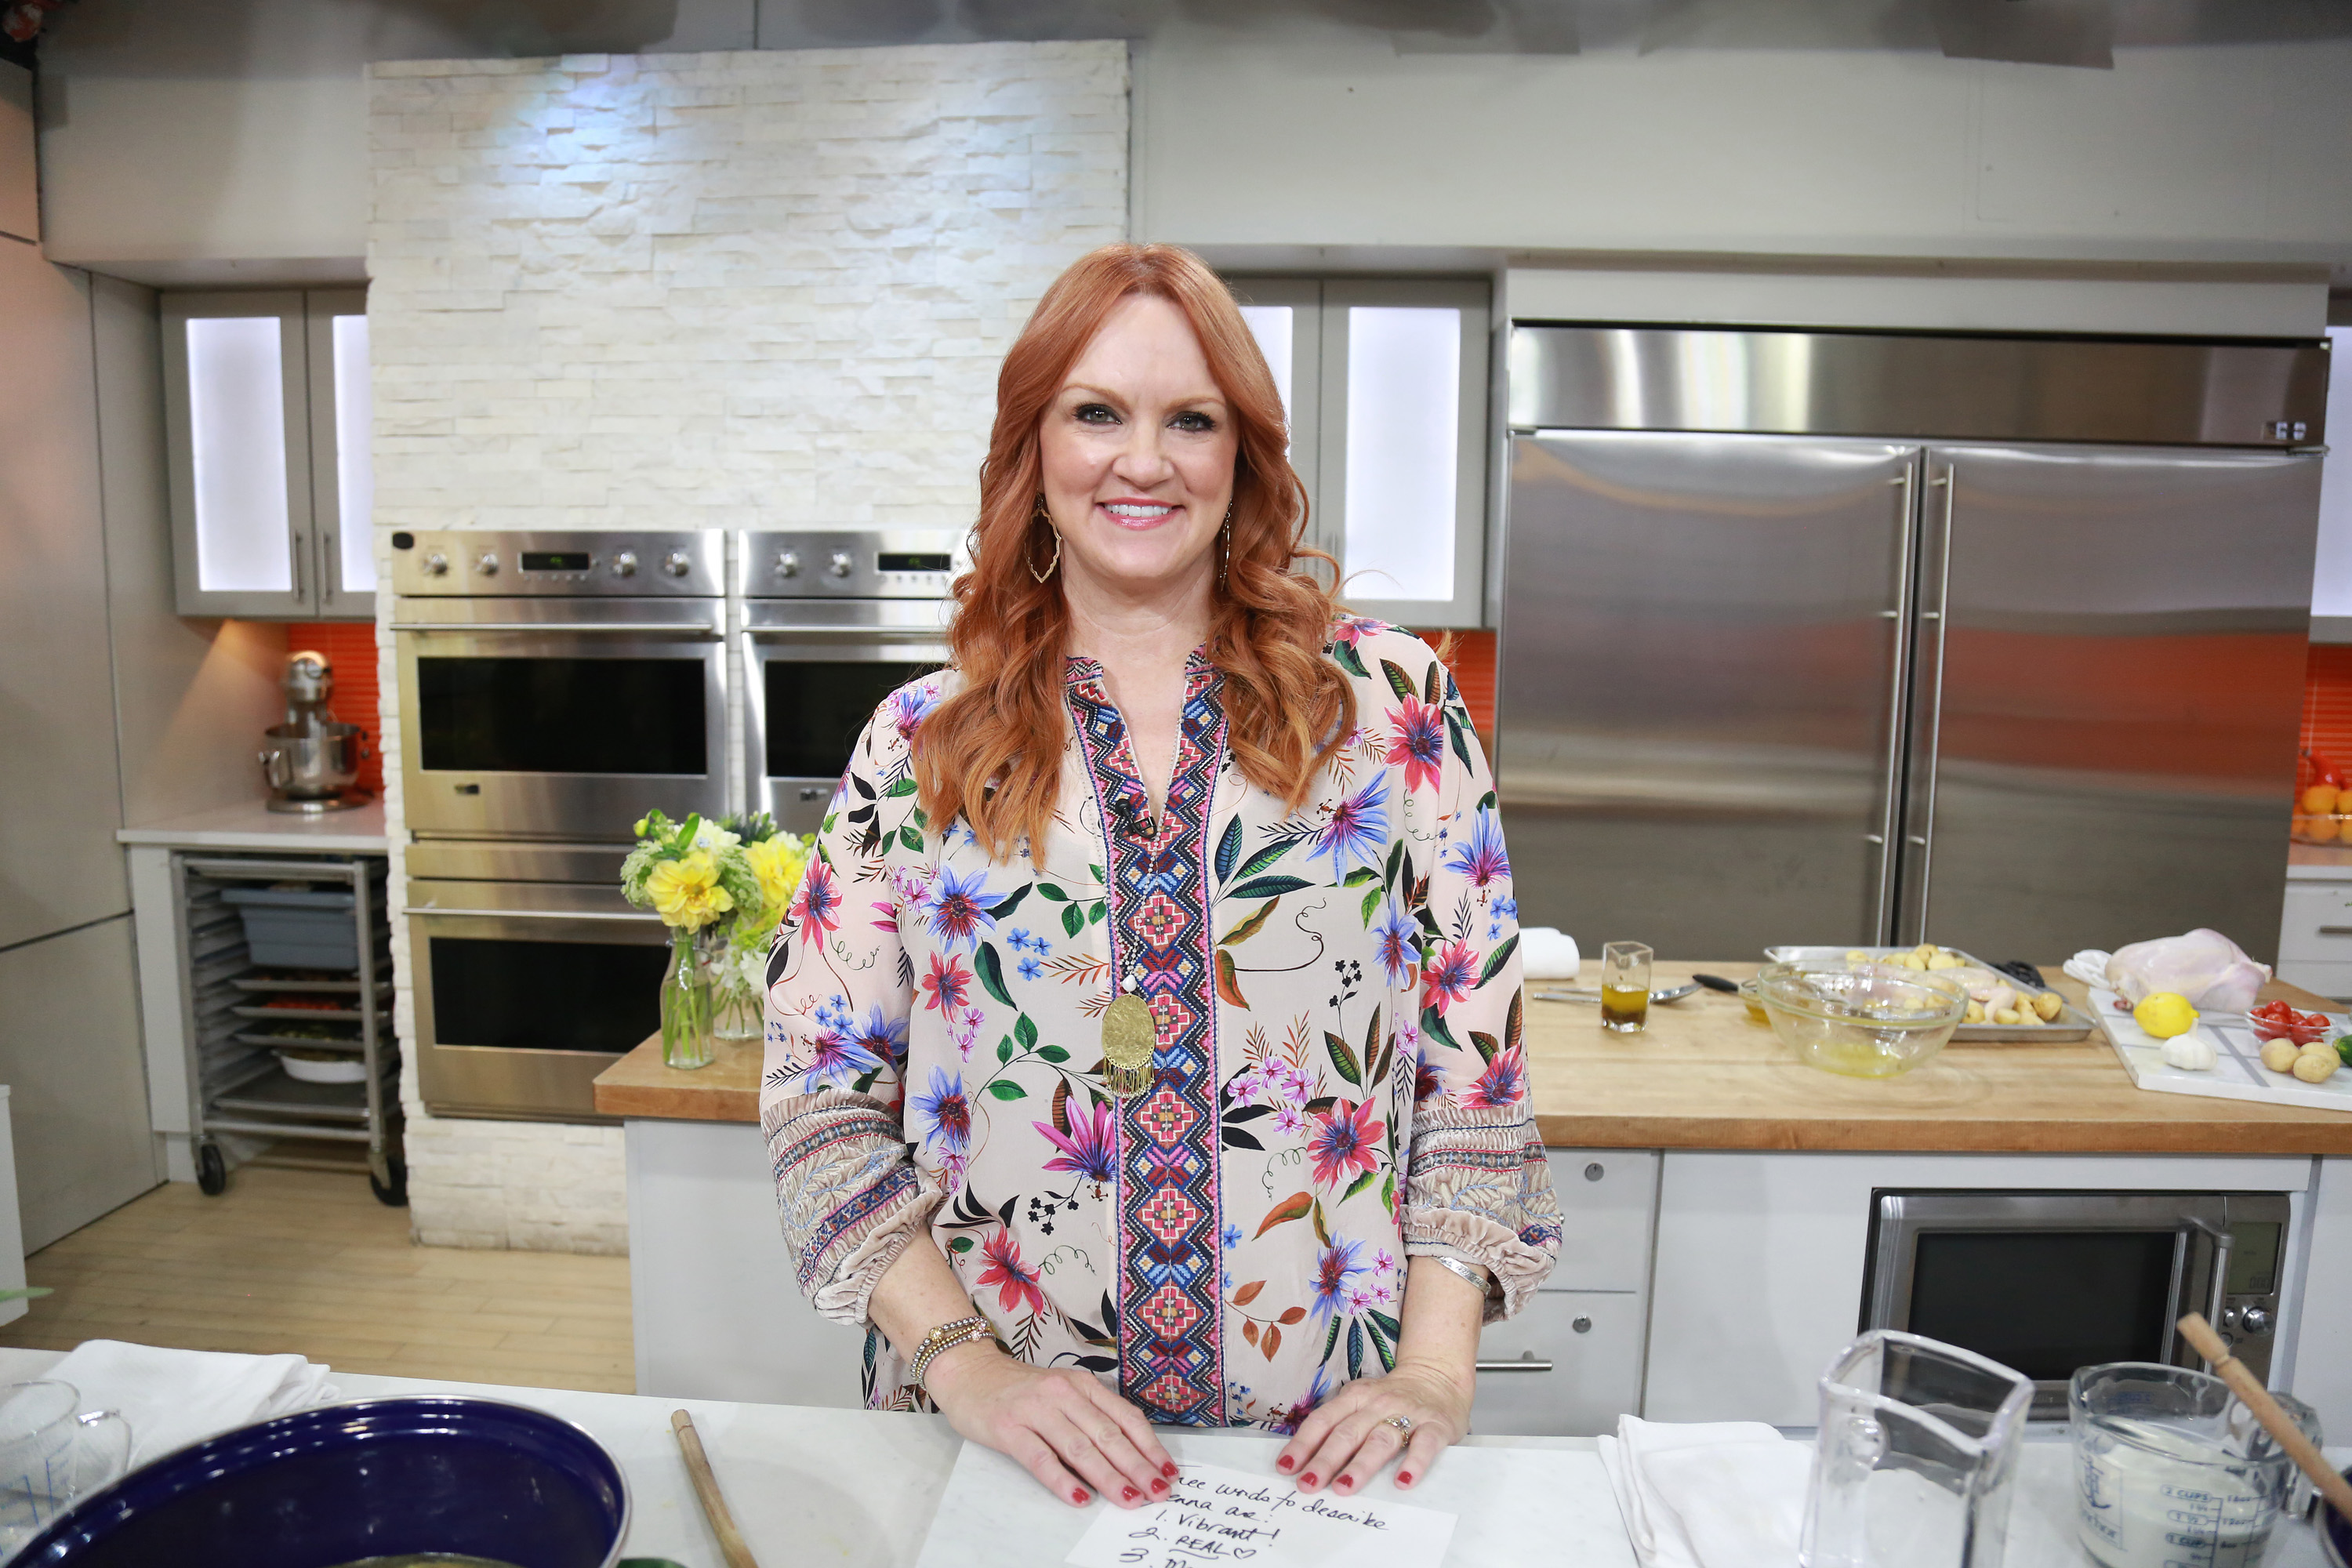 Ree Drummond wears a multicolor blouse in this photograph.